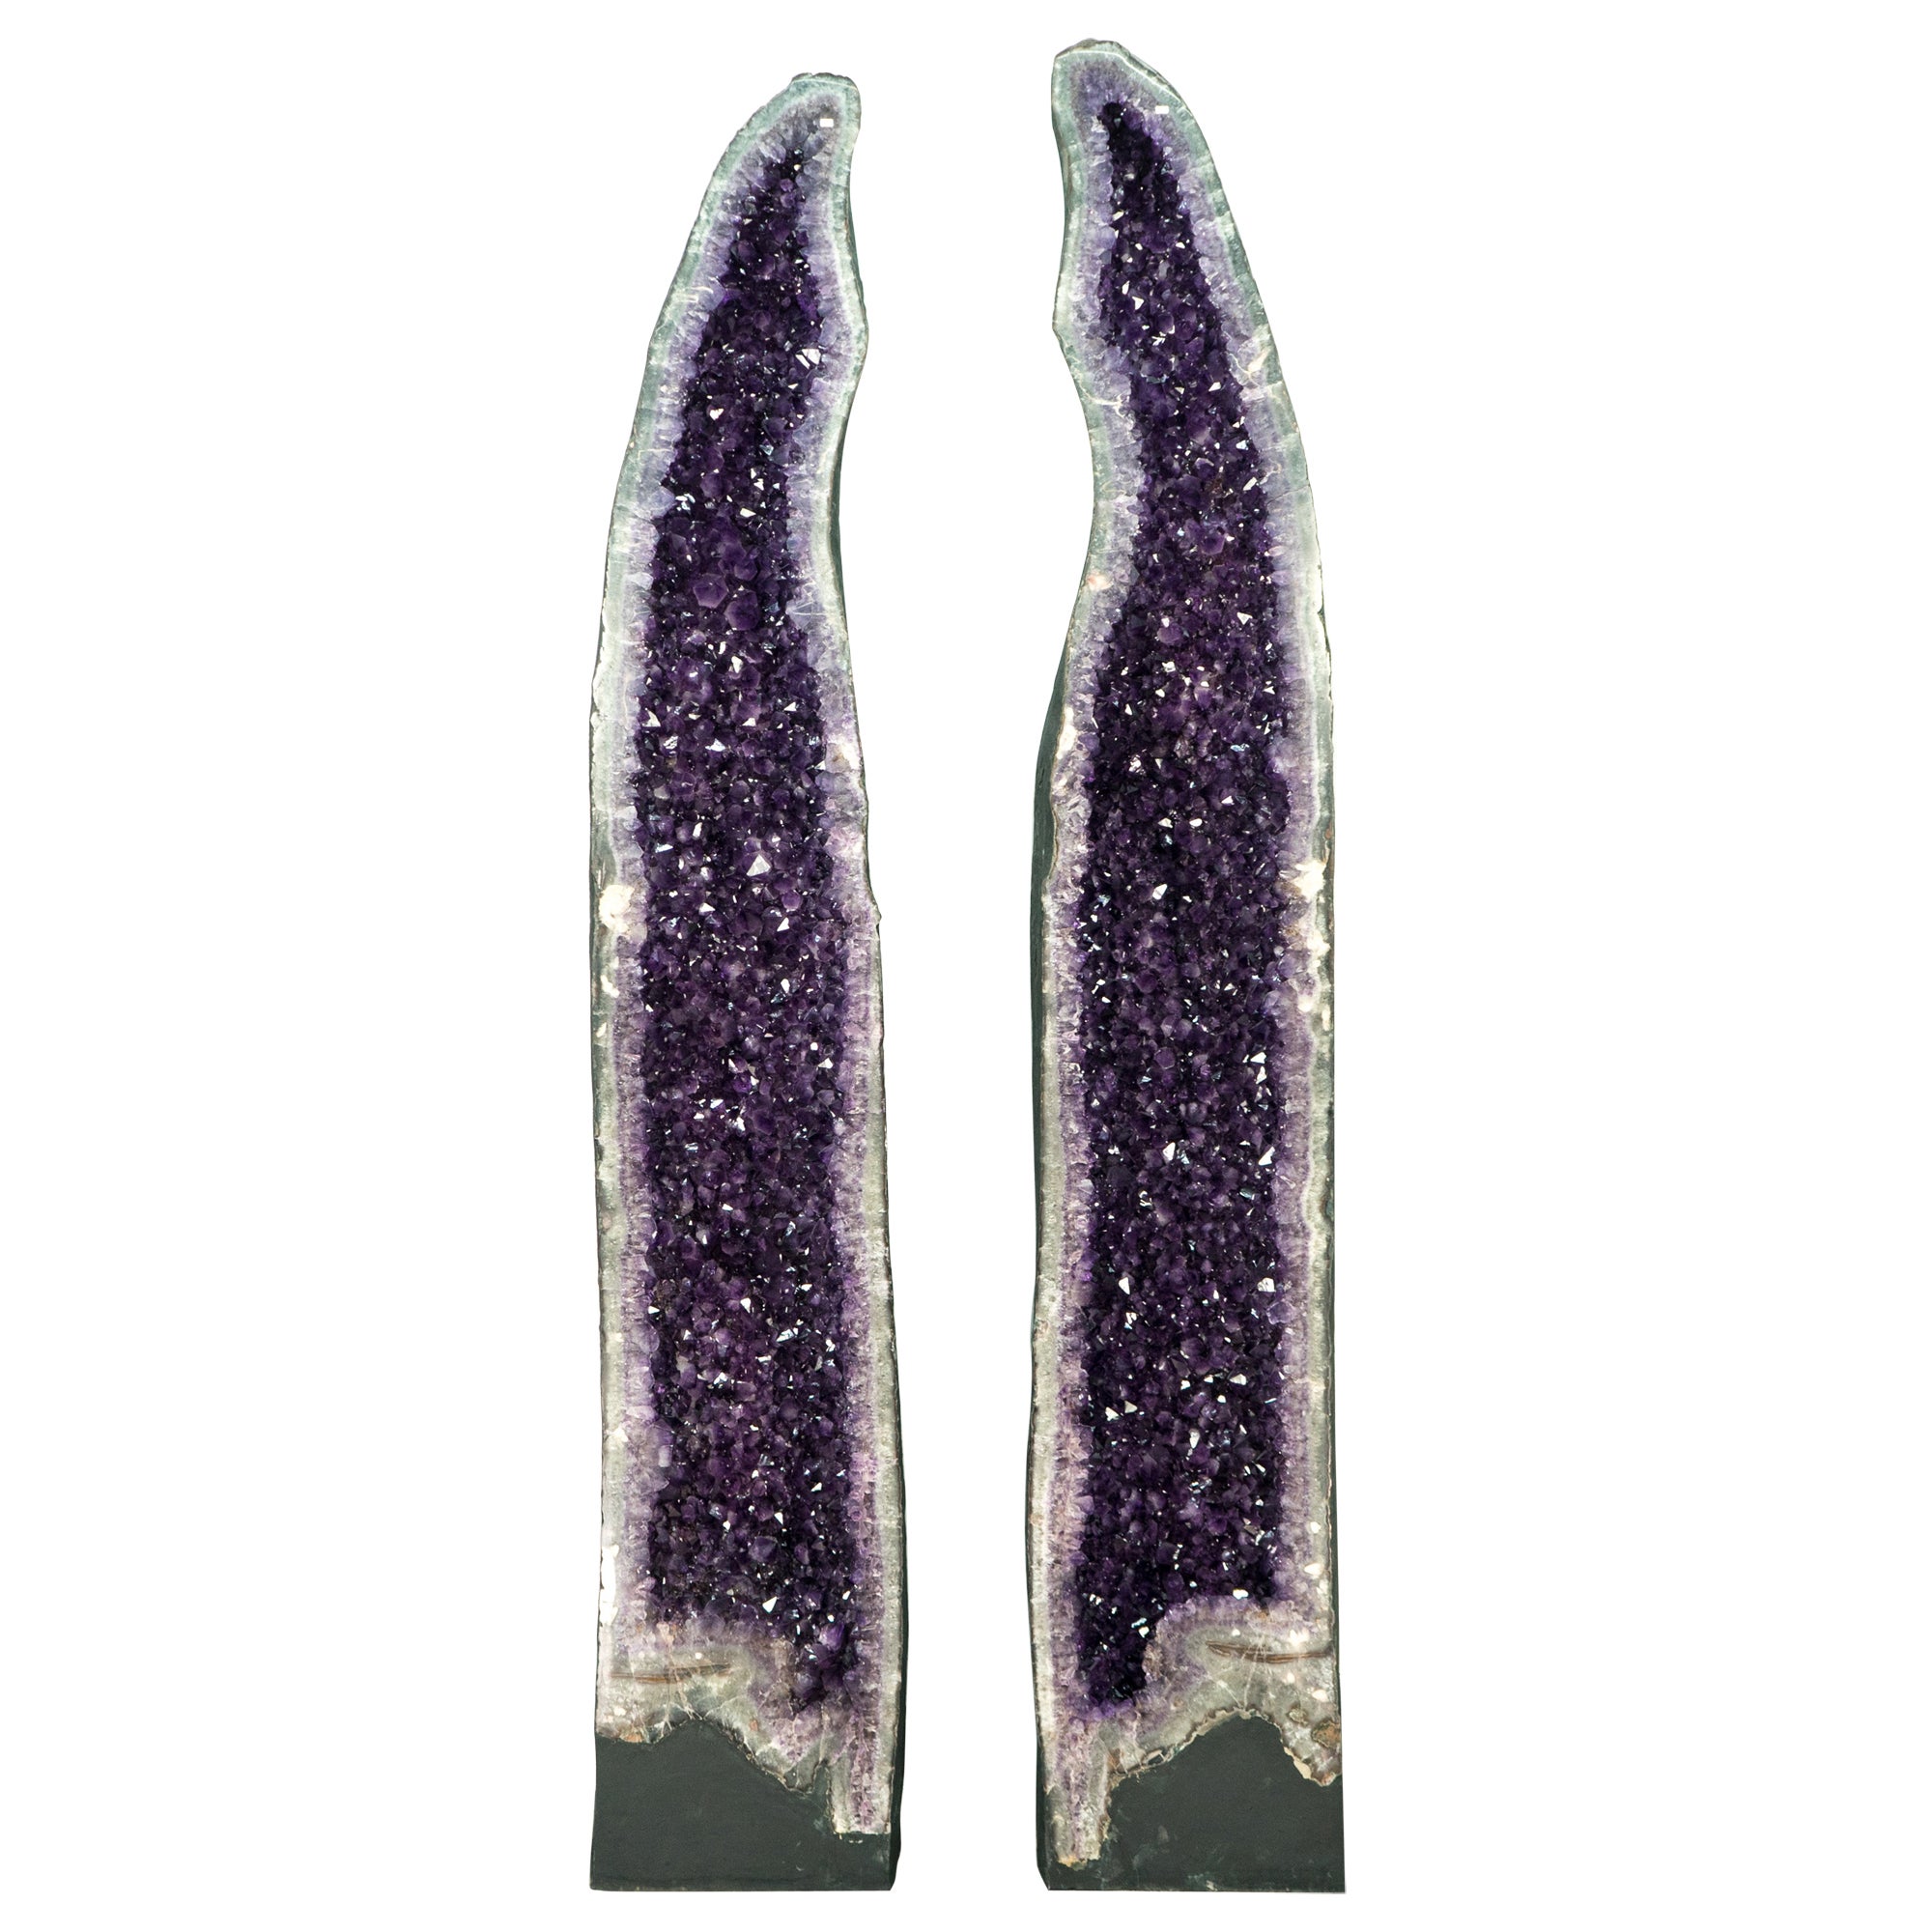 Pair of 8 Ft Tall Giant High-Grade Deep Purple Amethyst Cathedral Geodes For Sale